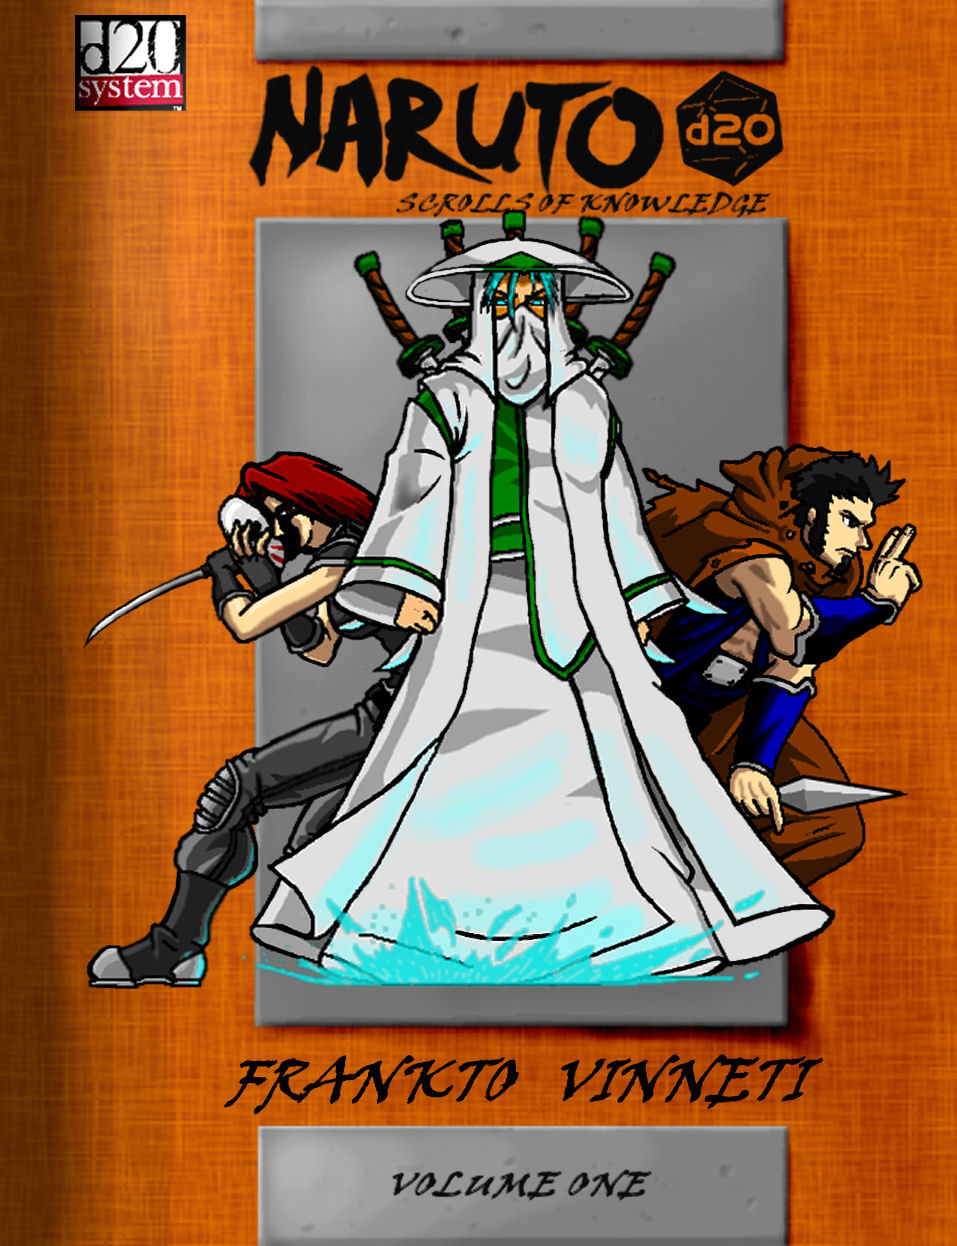 Naruto d20: Scrolls of Knowledge